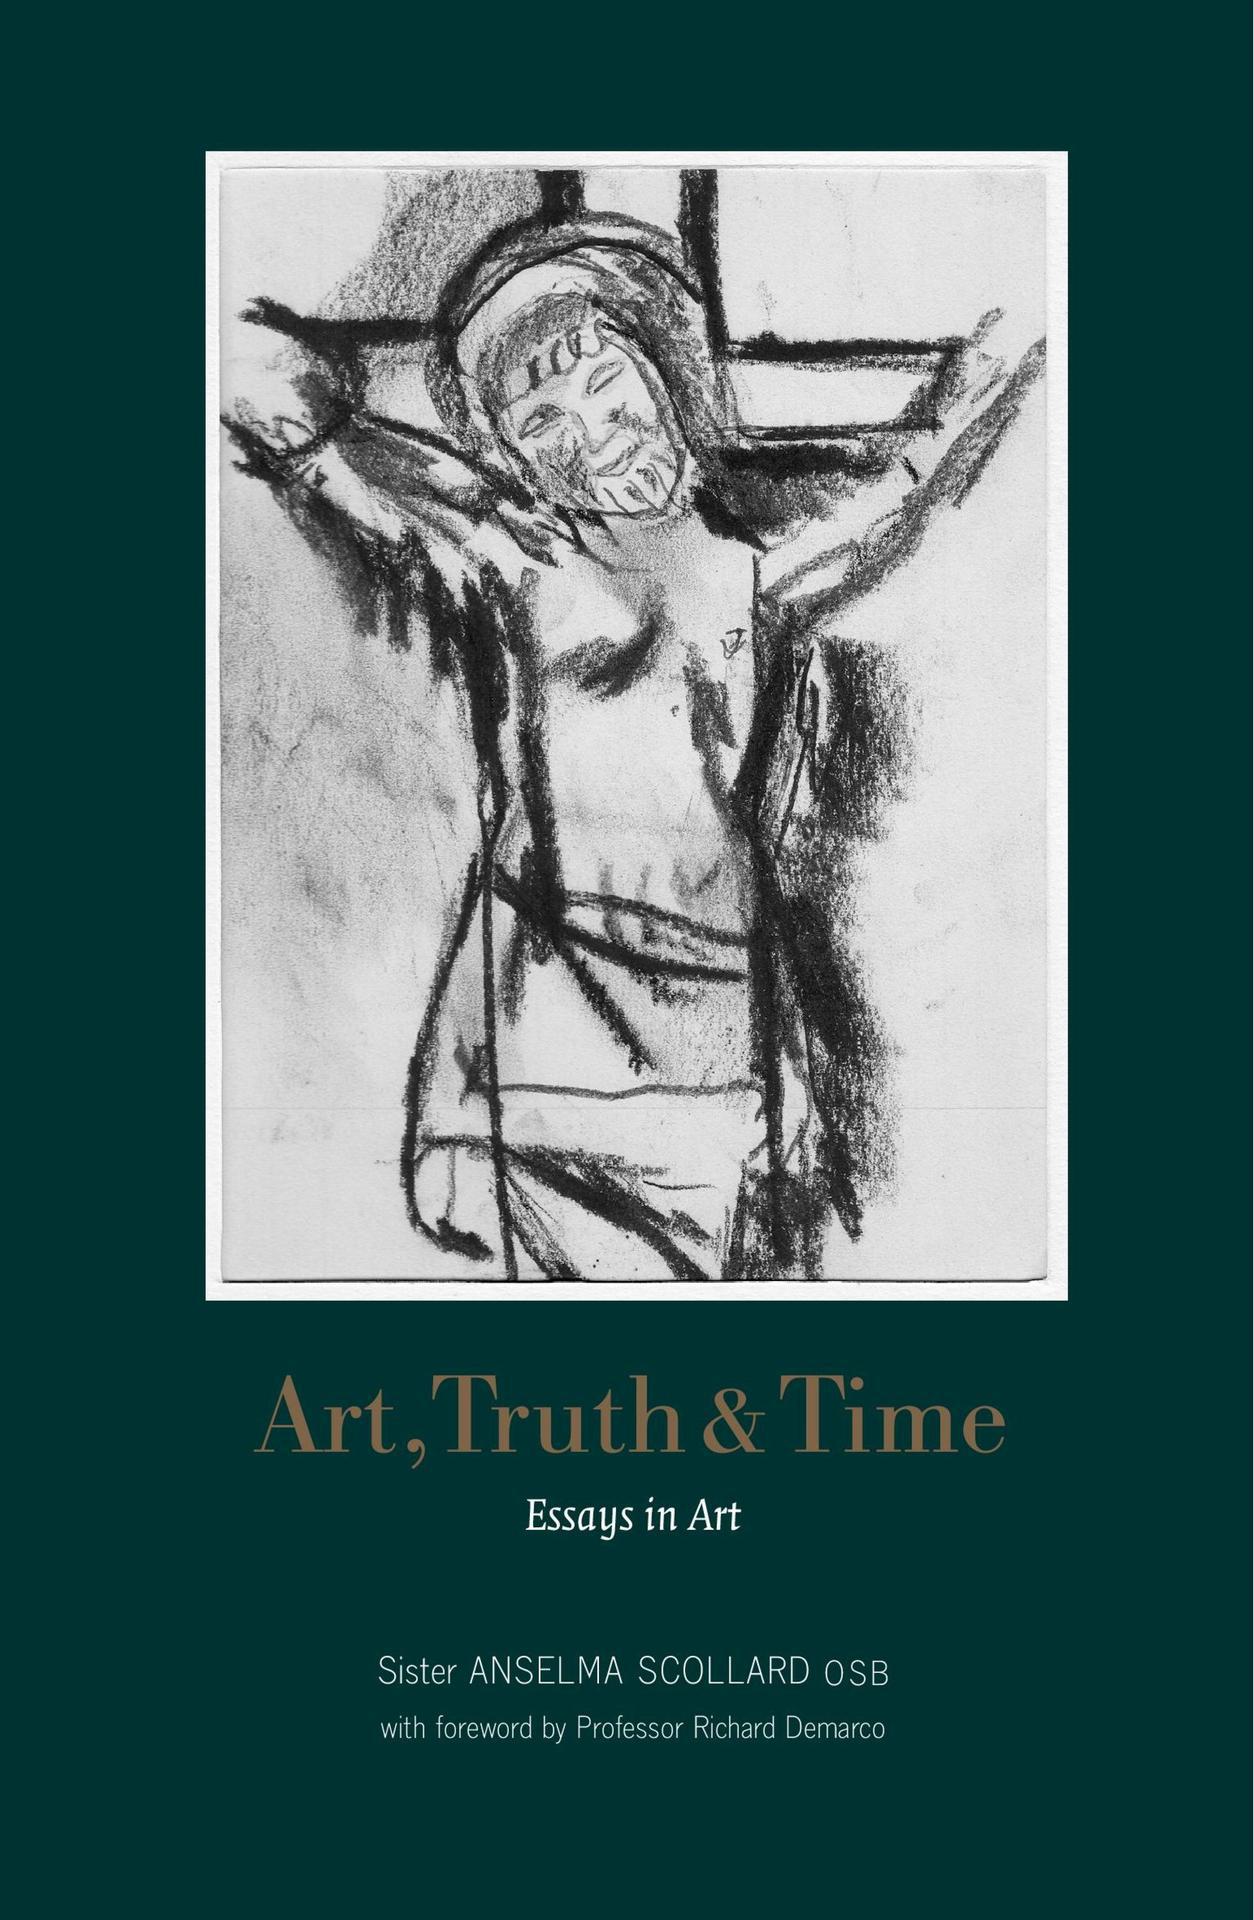 Art, truth and time essays in art